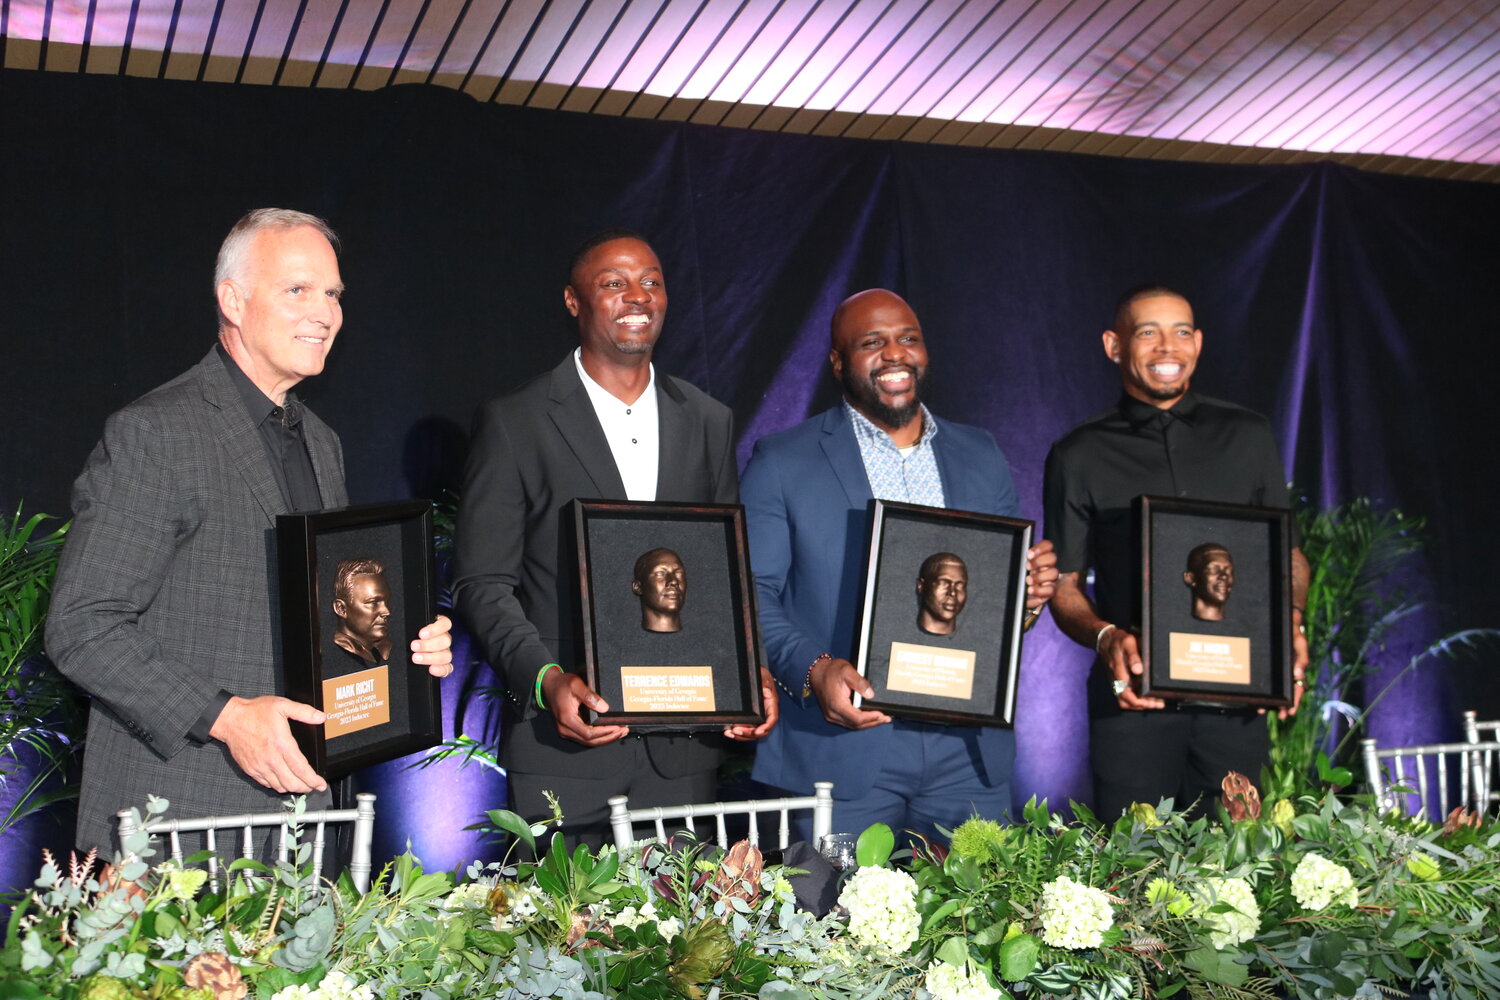 Mark Richt, Terrence Edwards, Earnest Graham and Joe Haden were the 2023 inductees into the Florida-Georgia Hall of Fame.